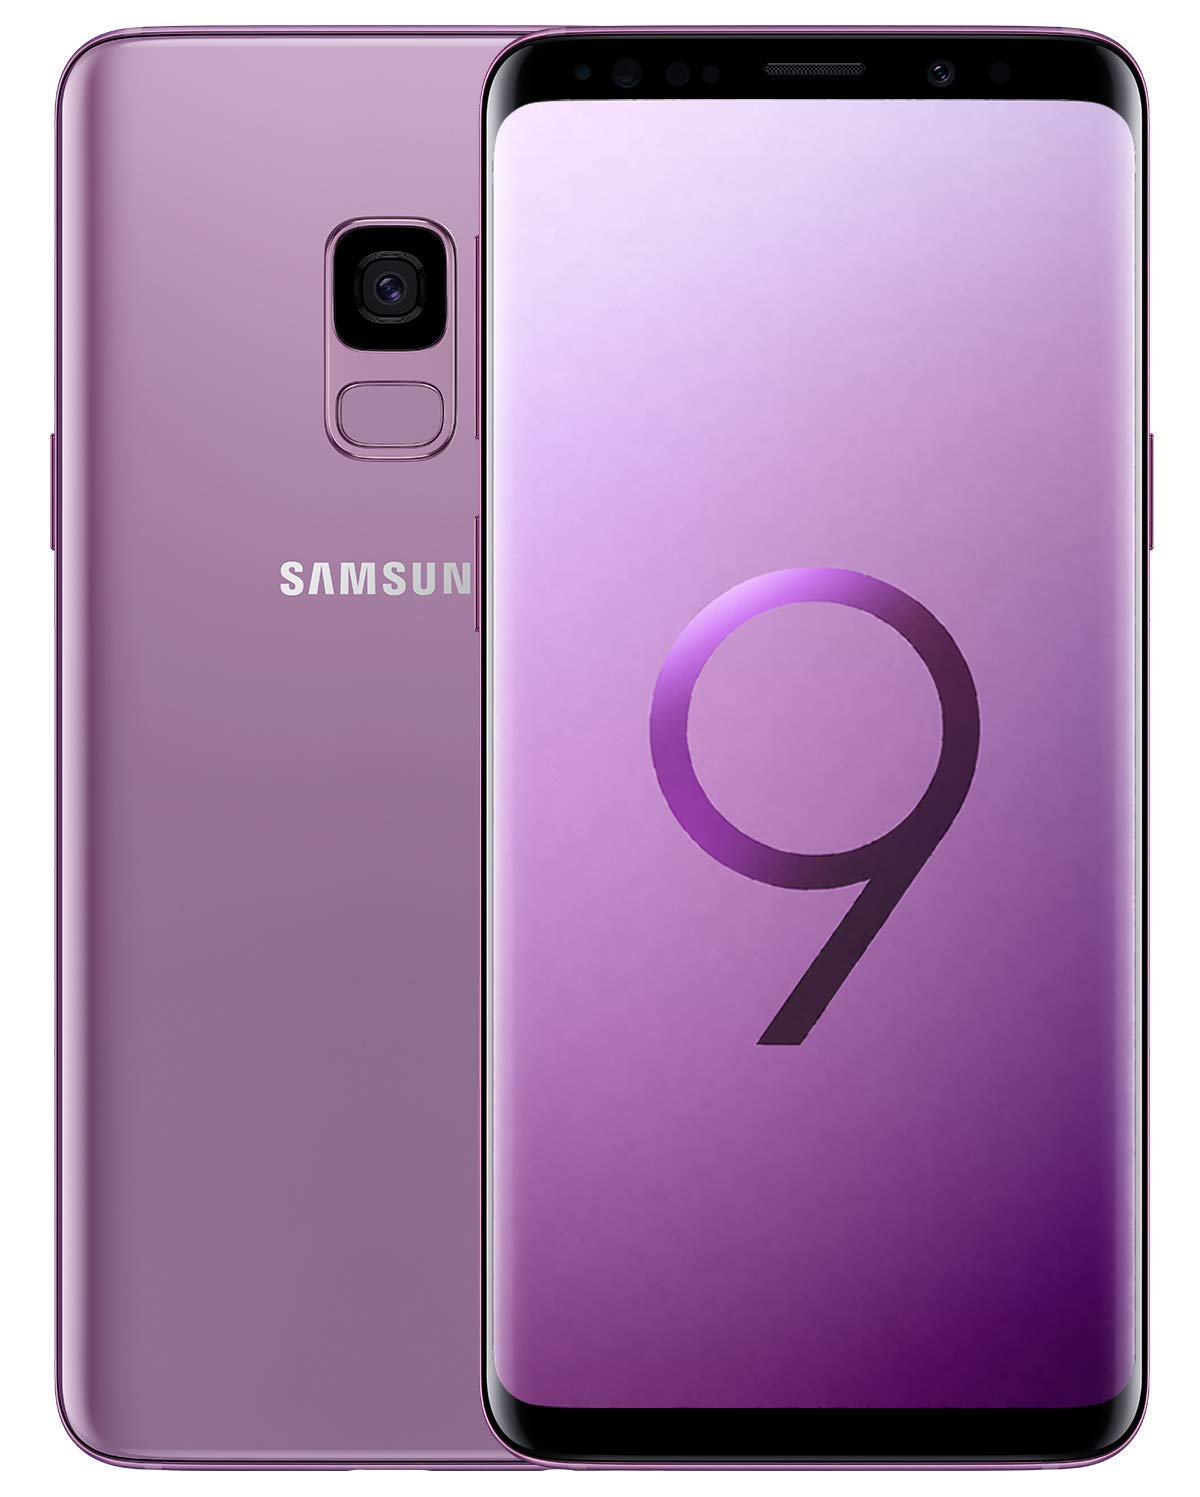 Samsung Galaxy S9 Only Rs 42990/-